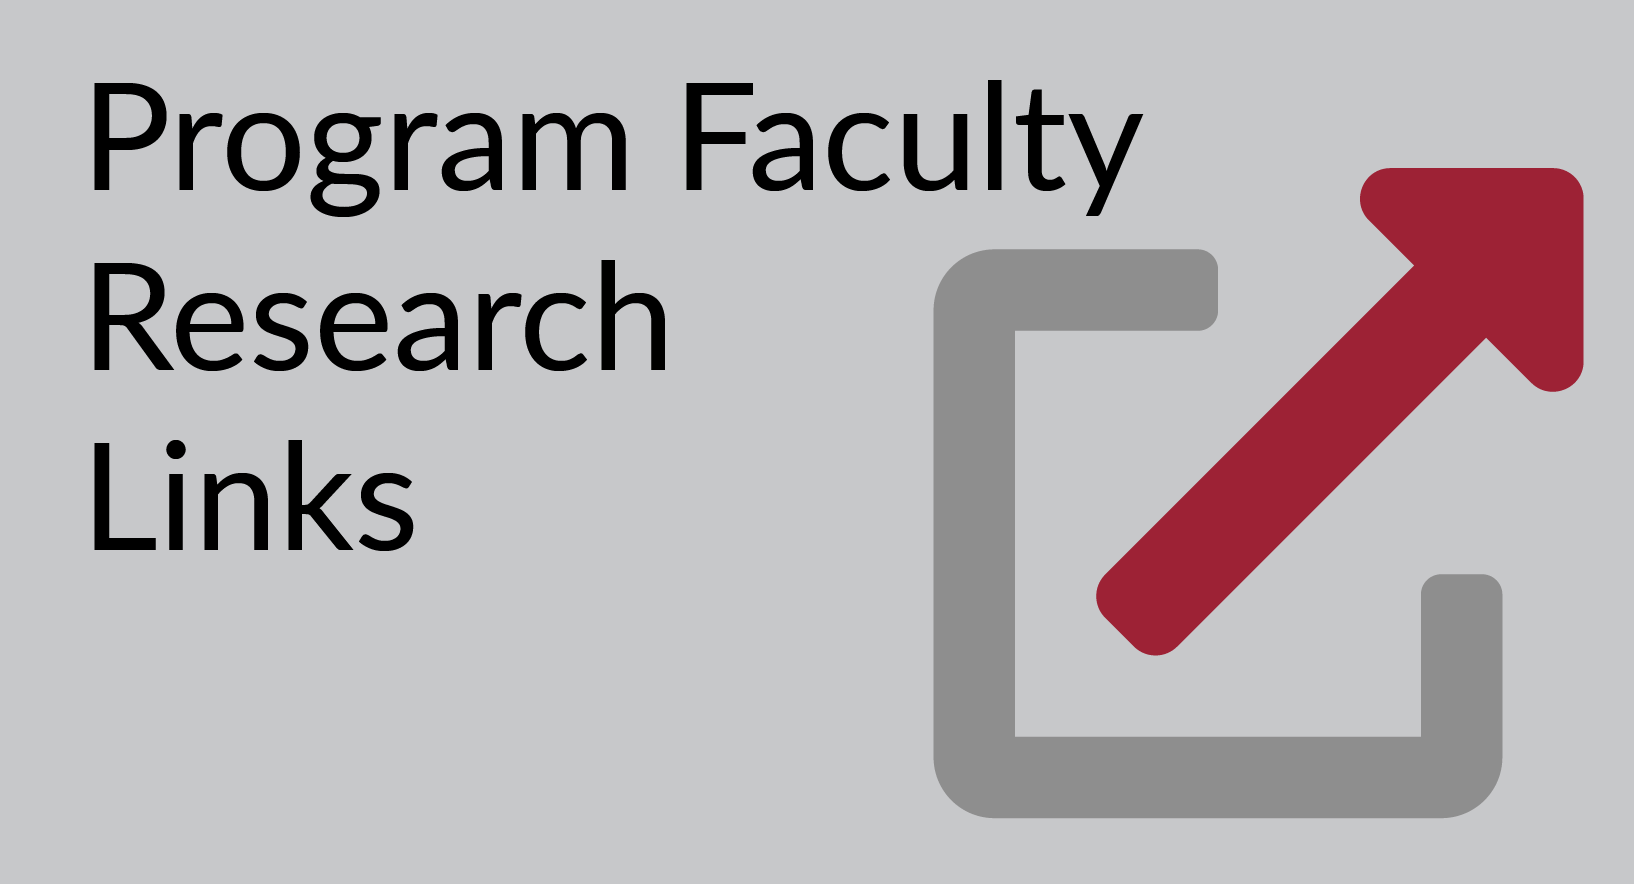 Program Faculty Research